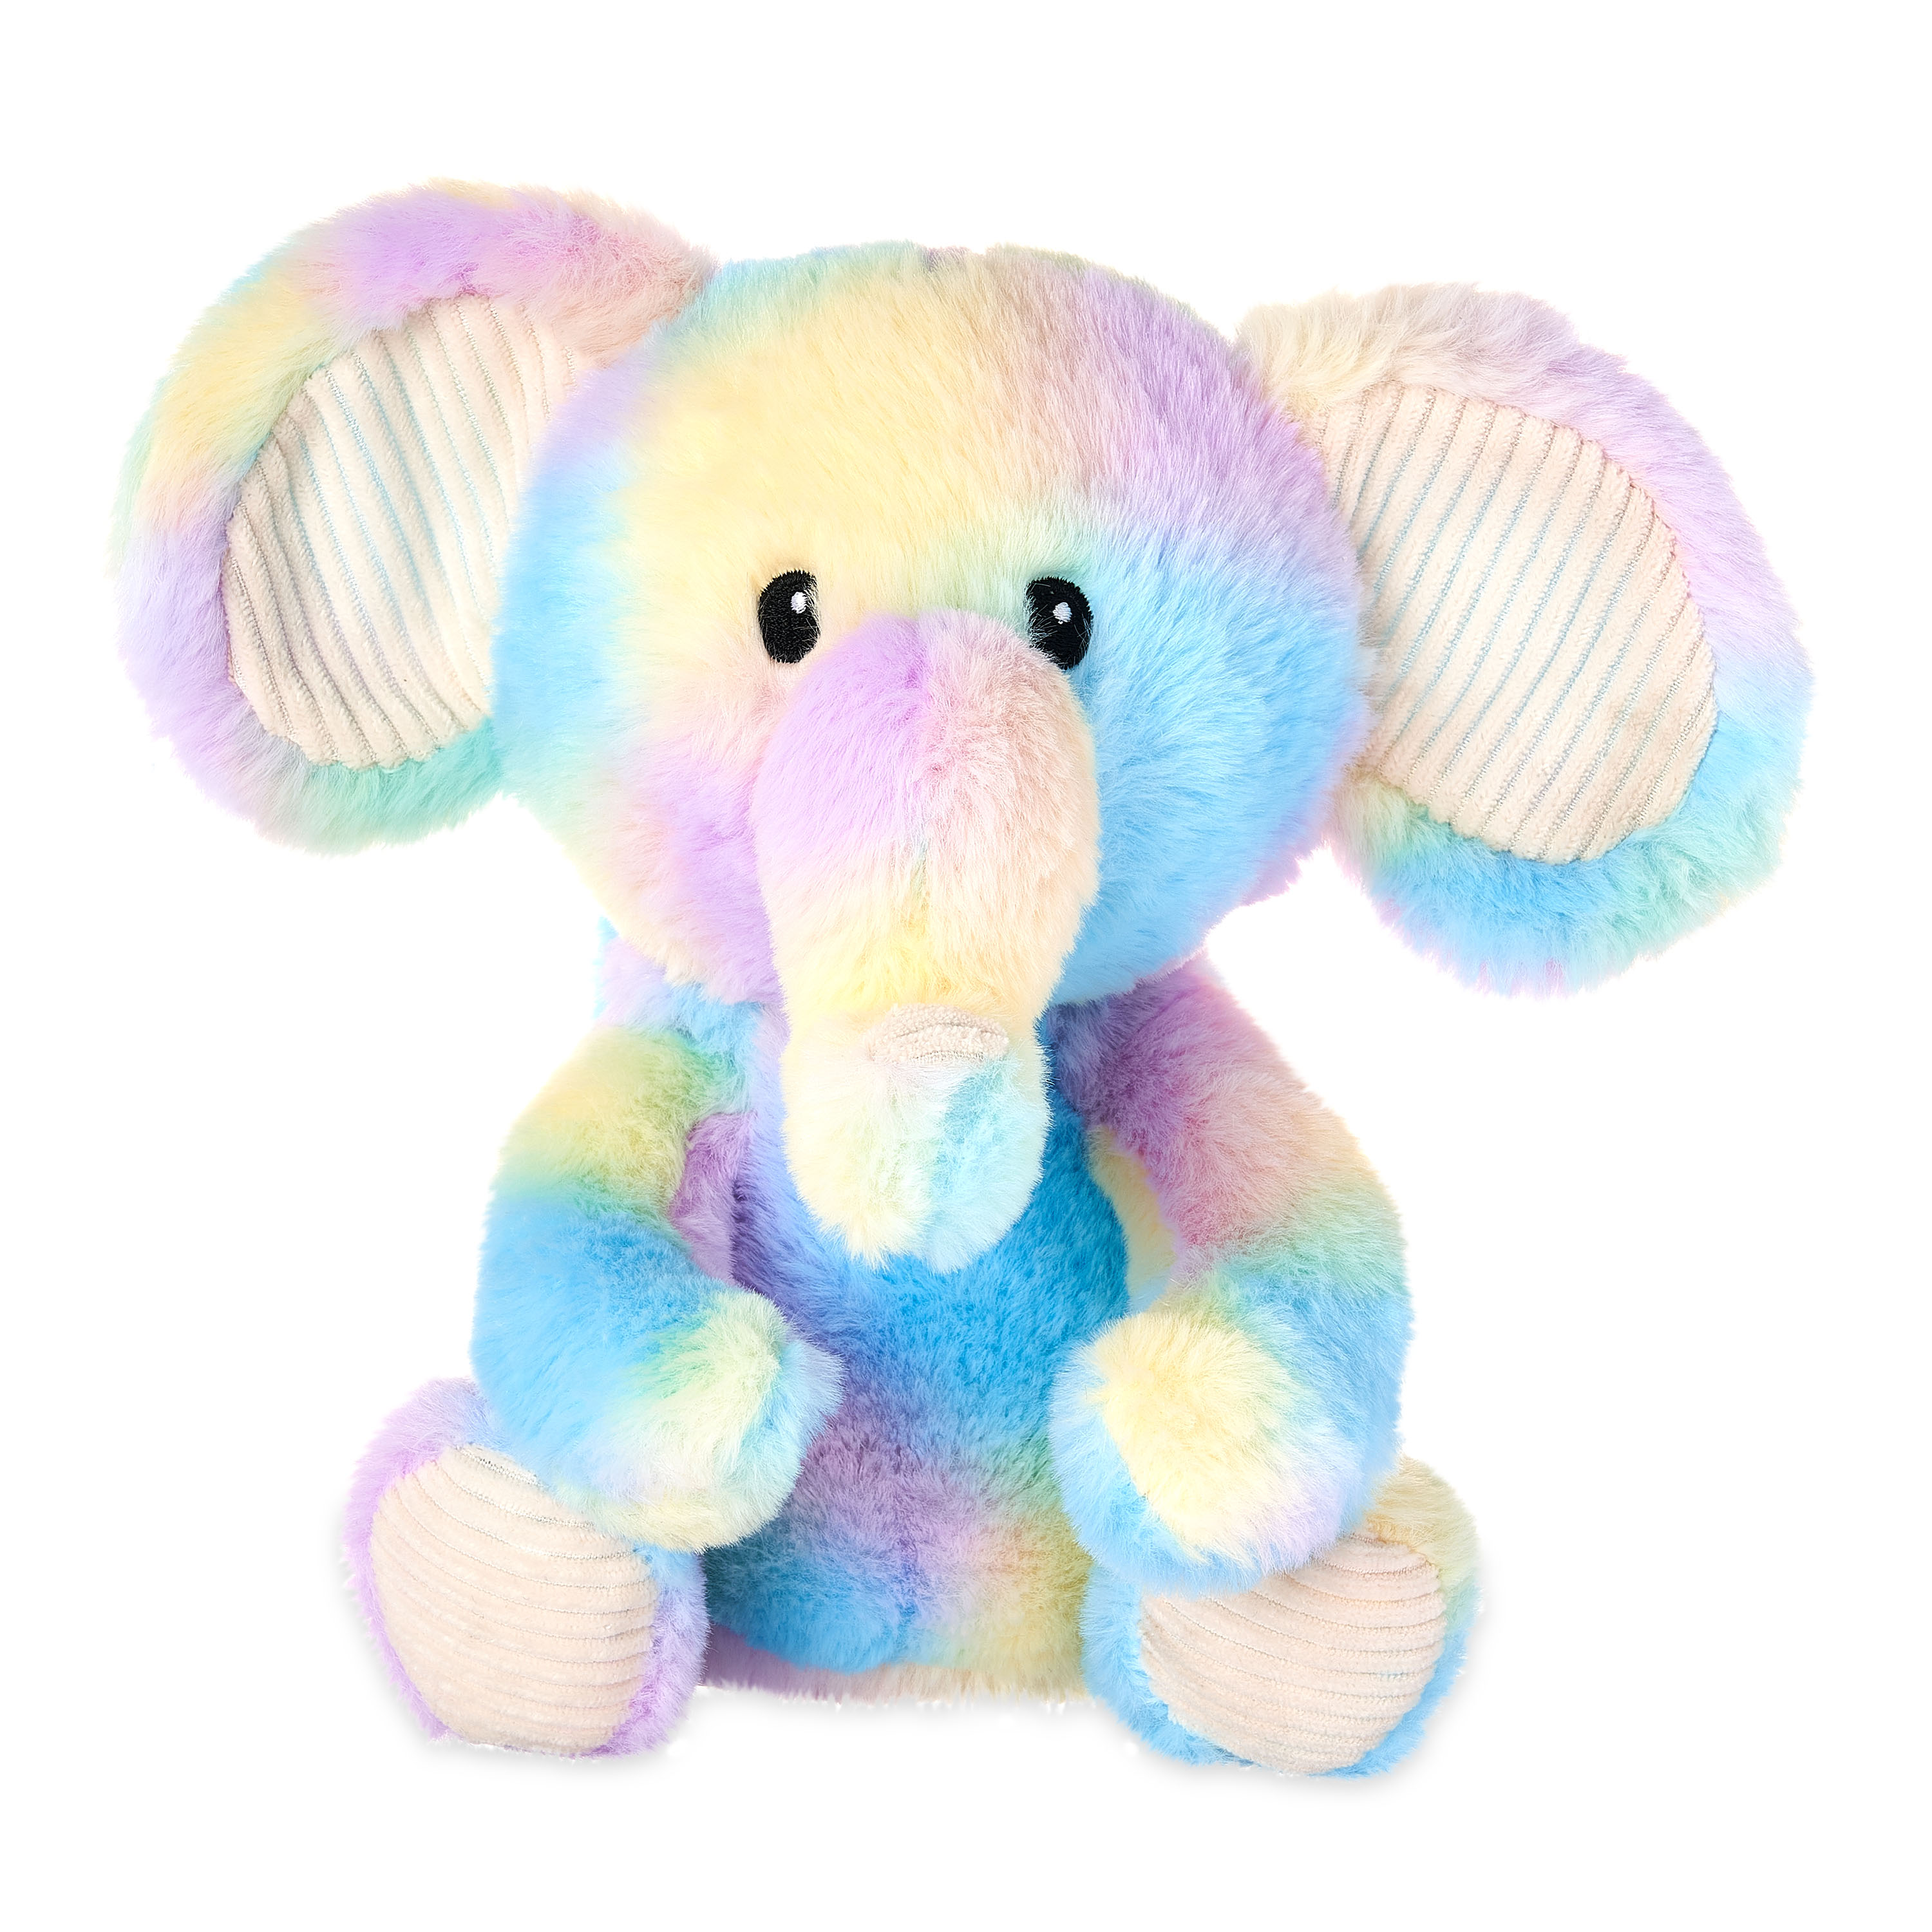 Spark Create Imagine Tie Dye Elephant Plush Toy, for All Ages - image 1 of 7